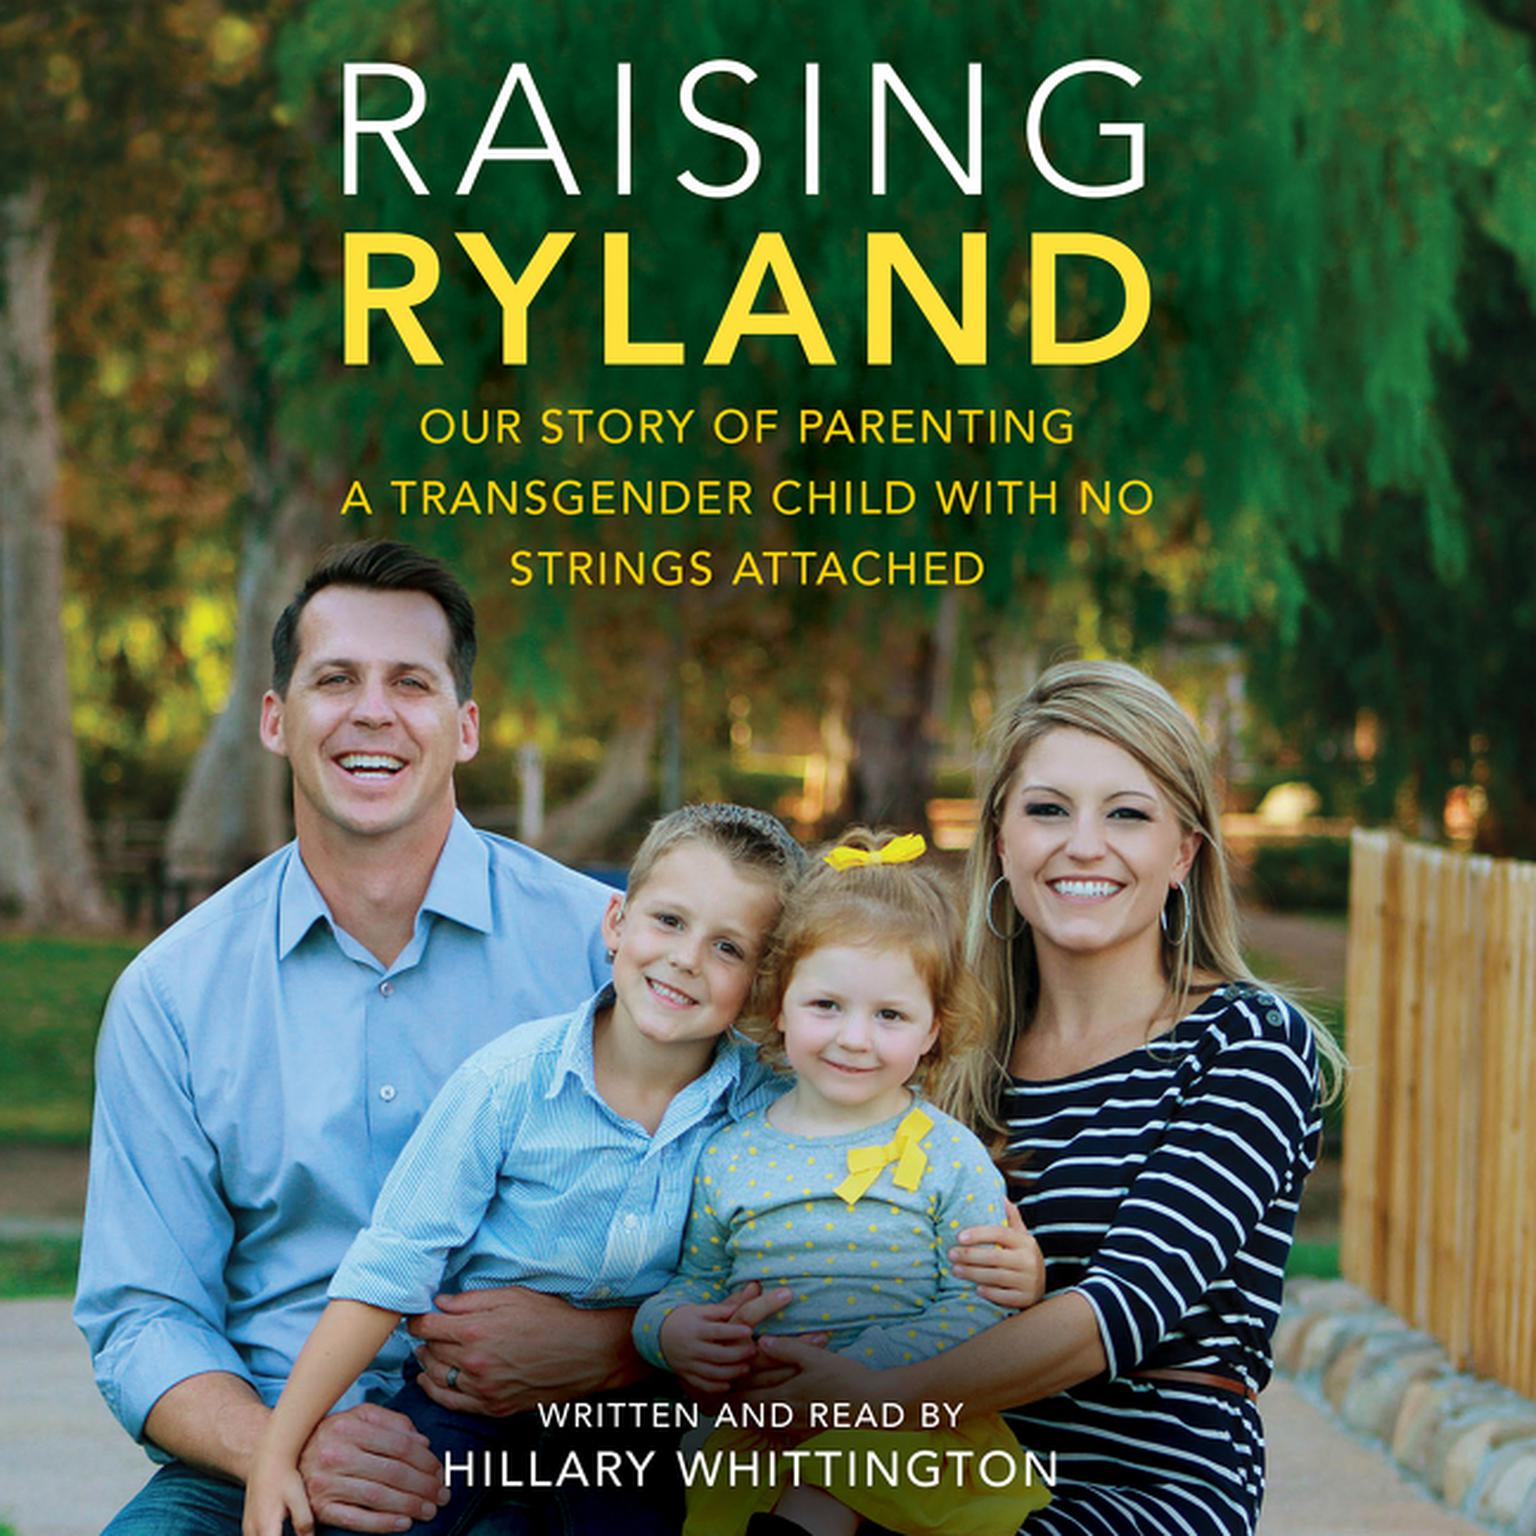 Raising Ryland: Our Story of Parenting a Transgender Child with No Strings Attached Audiobook, by Hillary Whittington